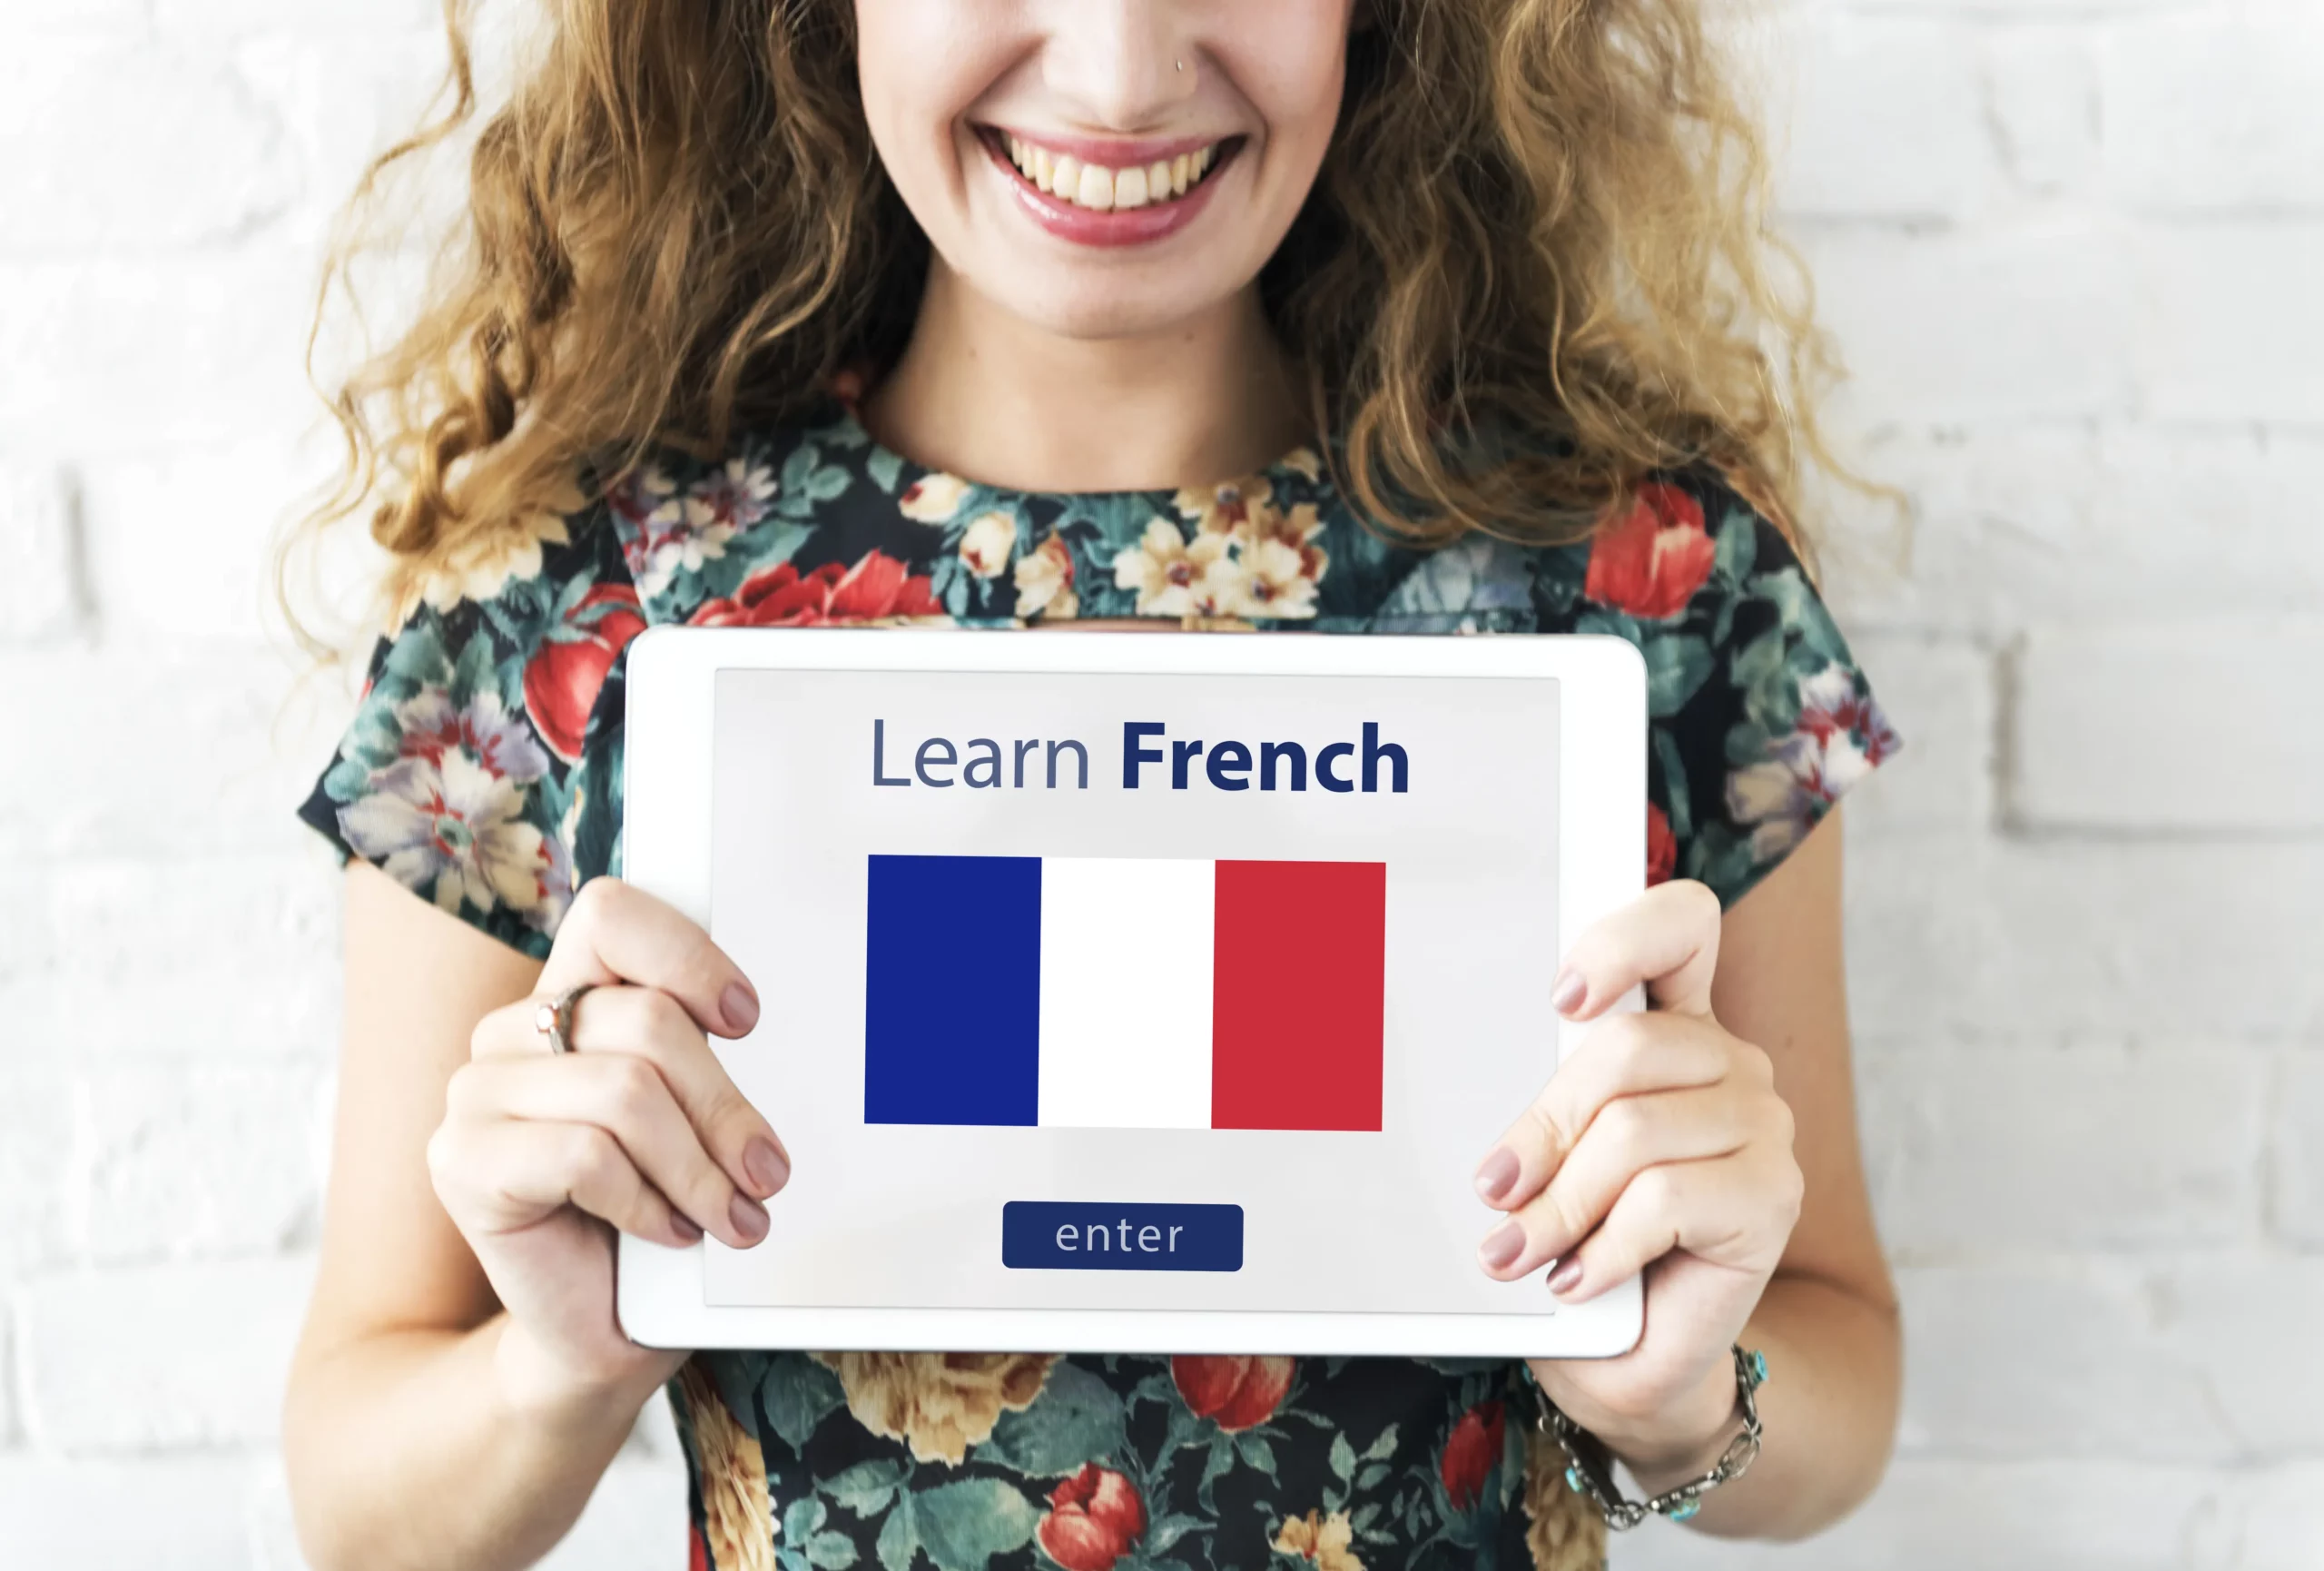 learn-french-language-online-education-concept